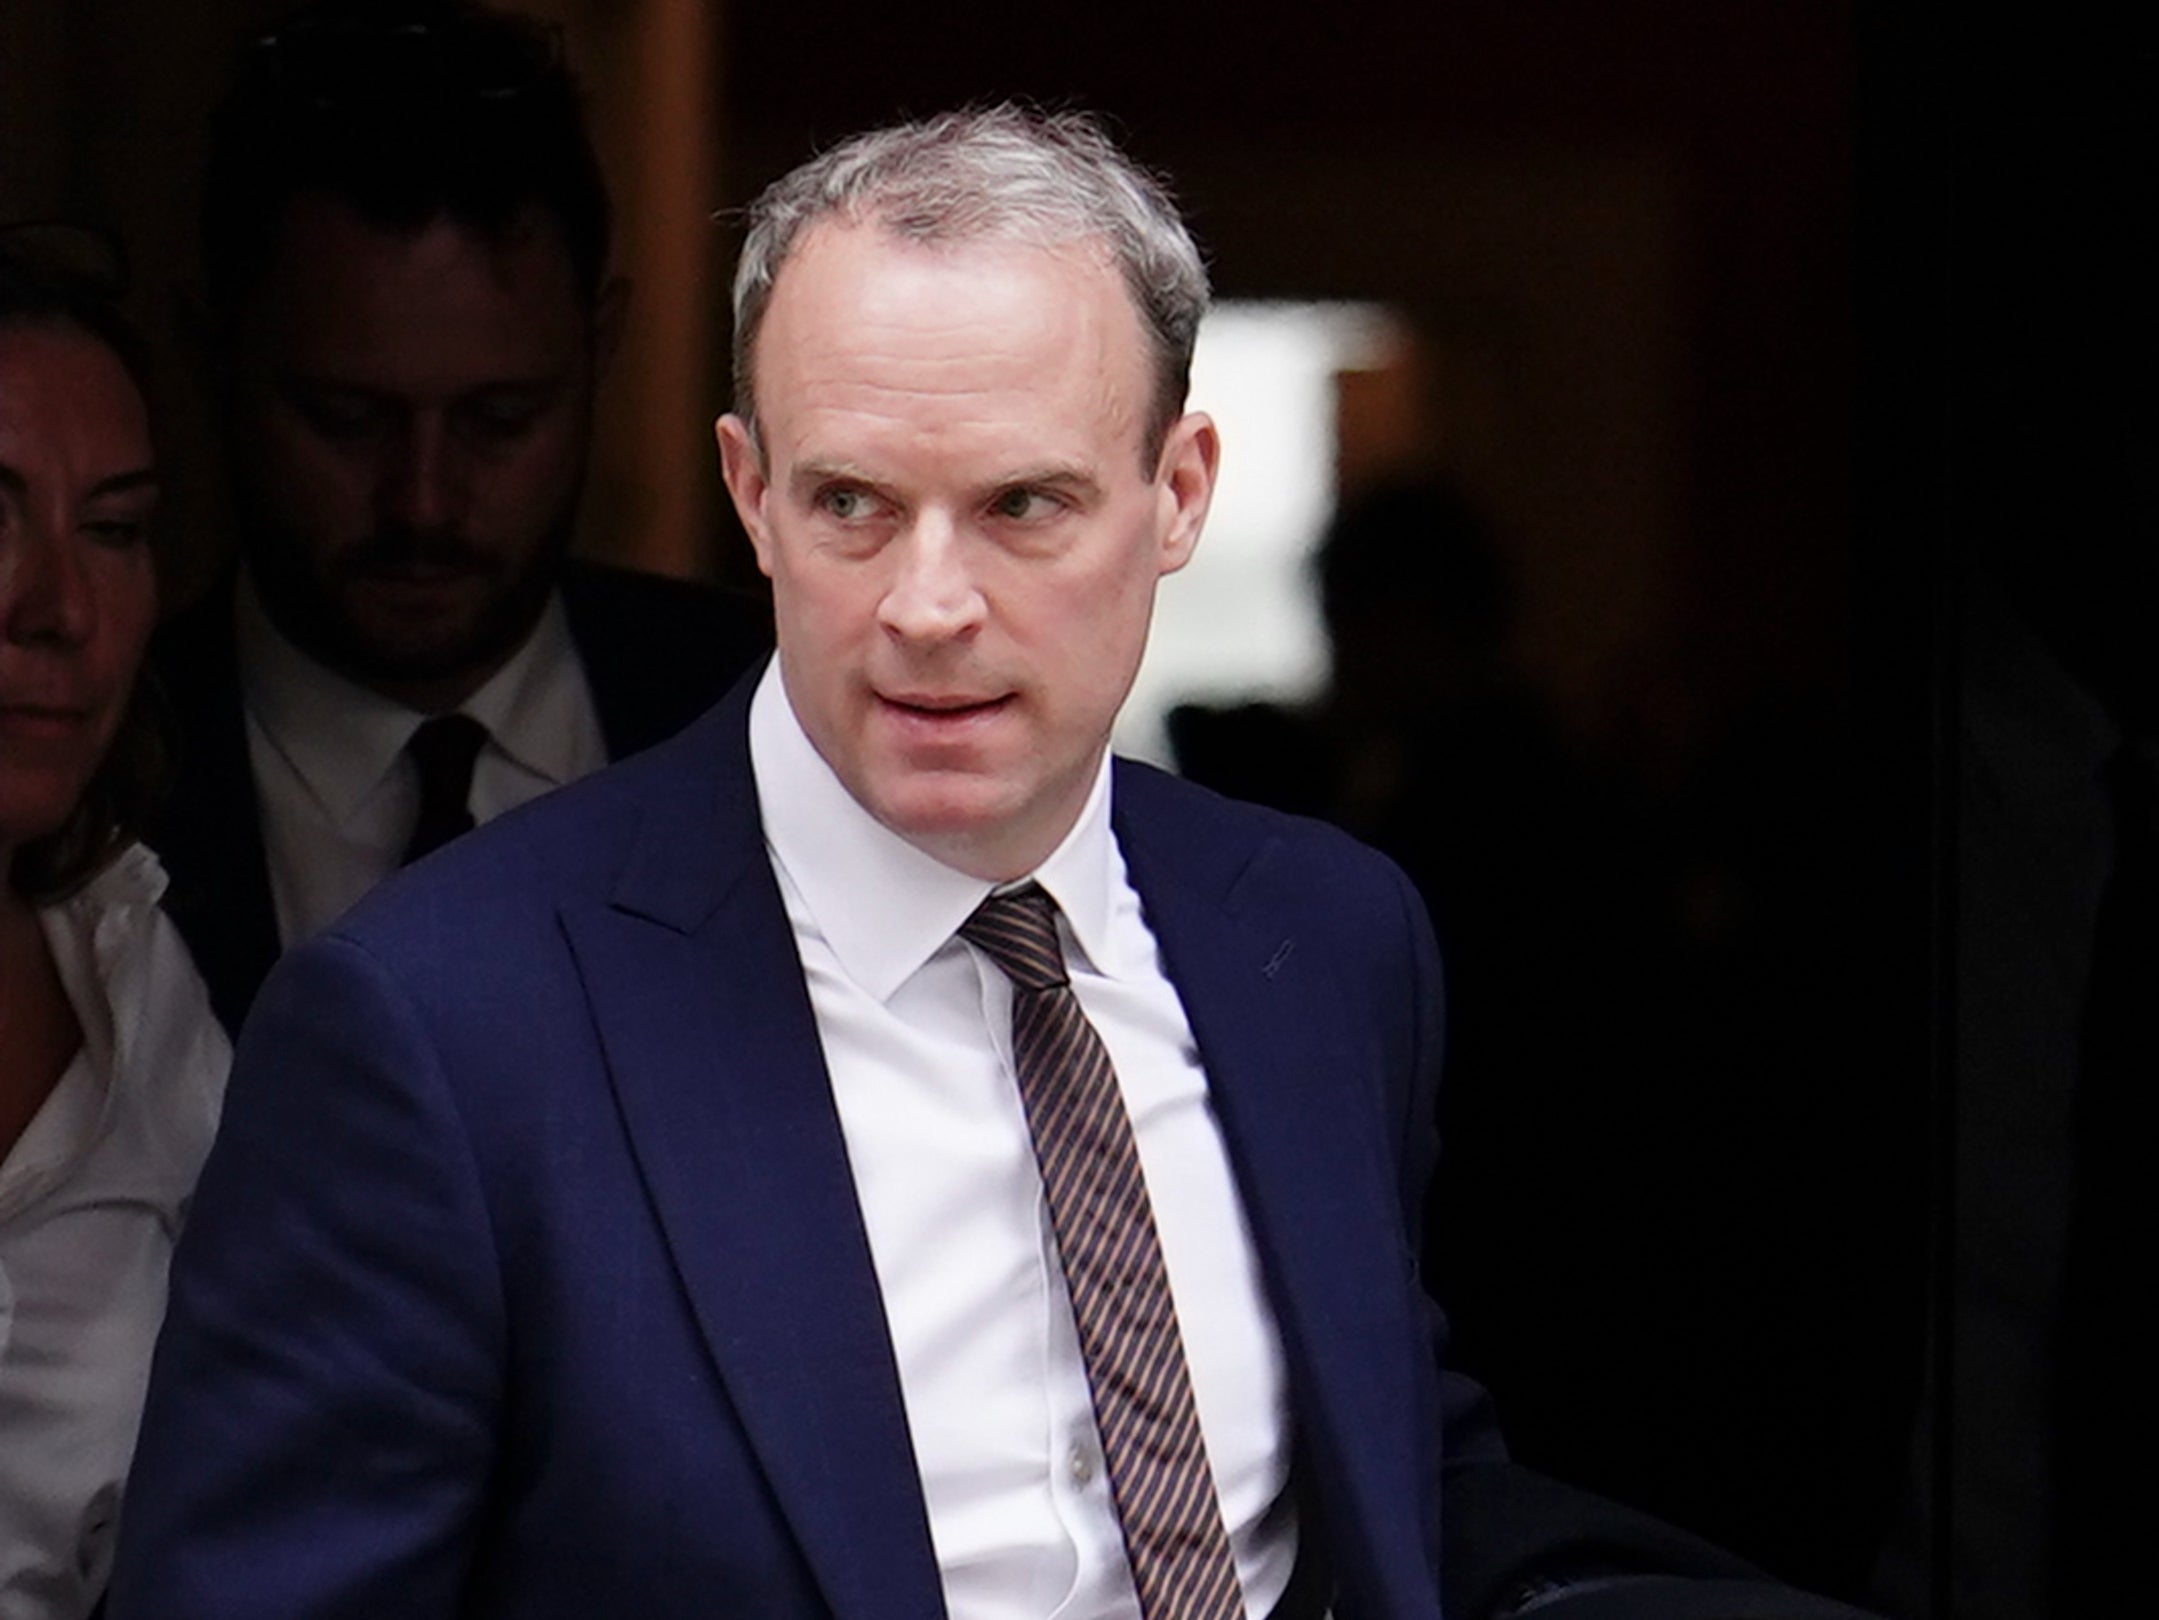 Dominic Raab has paid for his own legal fees during probe